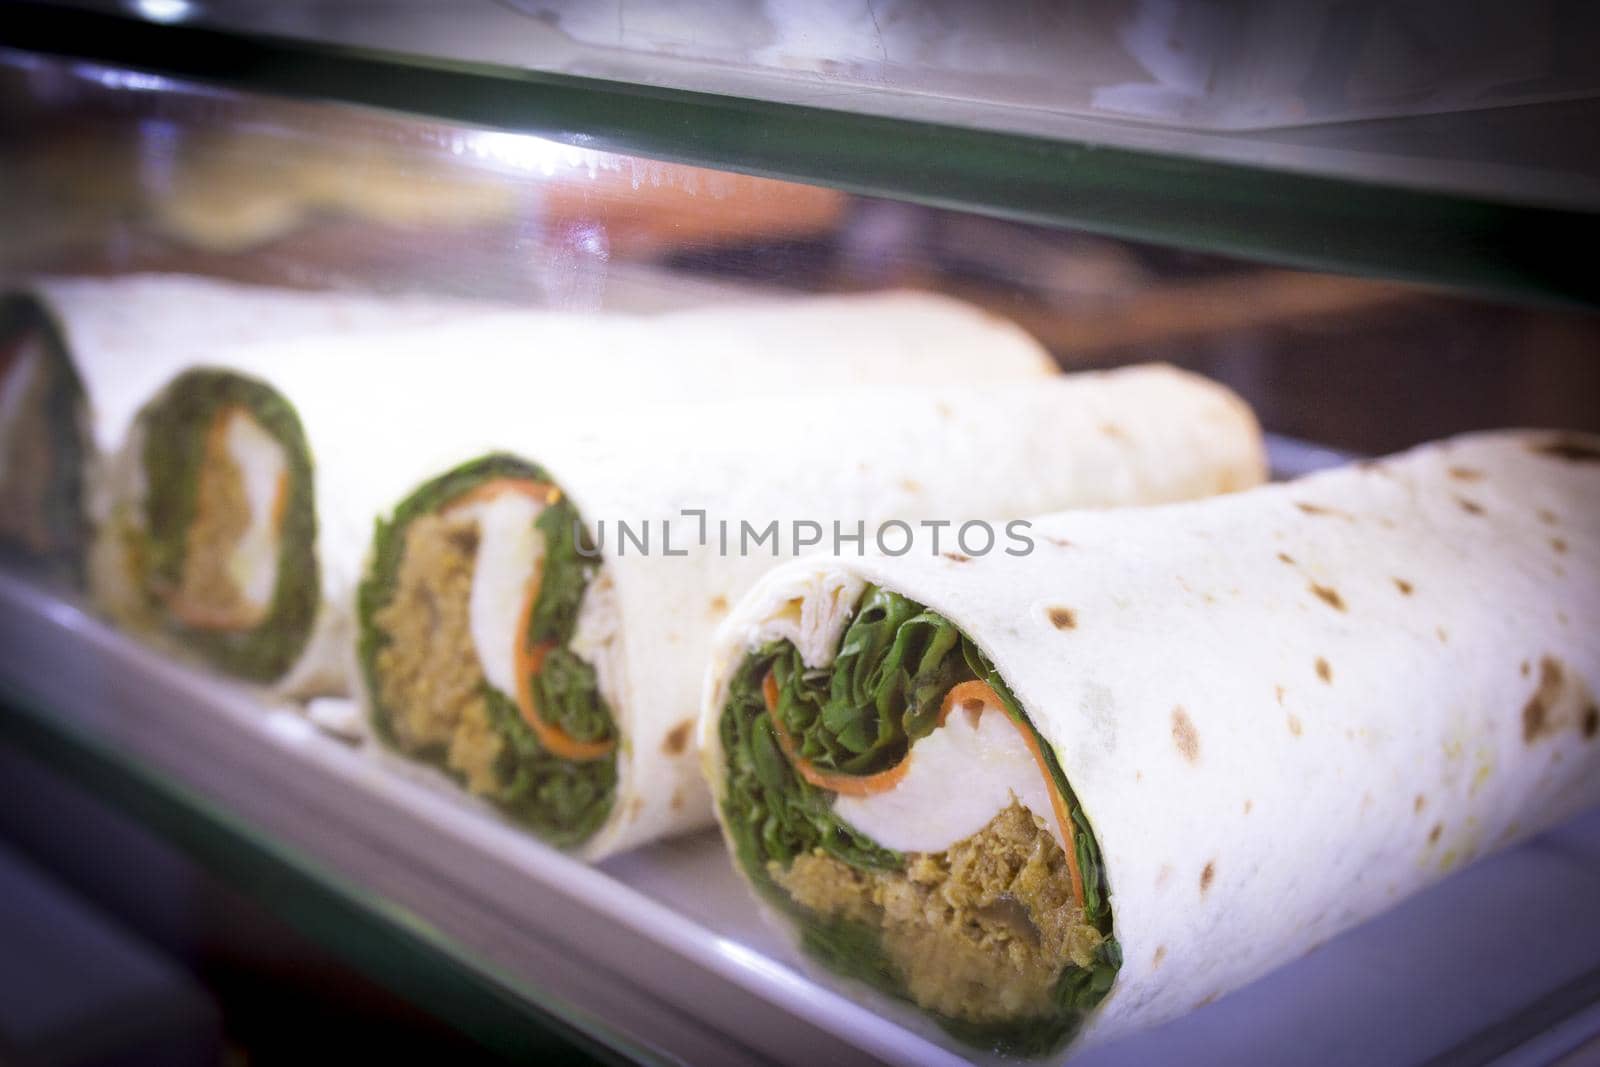 Vegetable pancake roll with spinach. No people